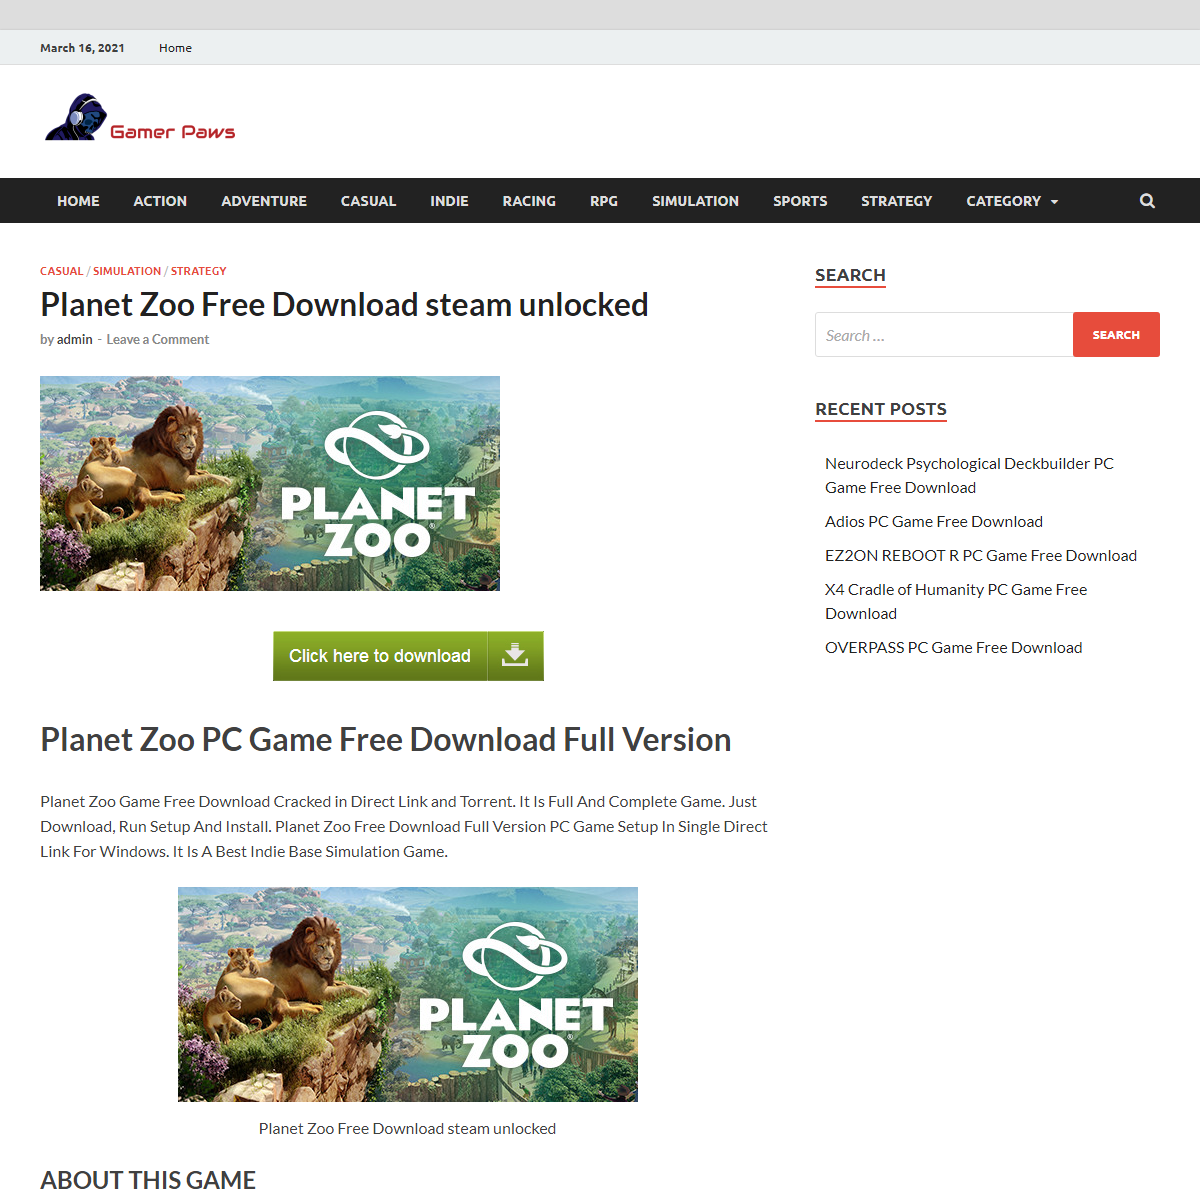 A complete backup of https://gamerpaws.com/planet-zoo-free-download-steam-unlocked/